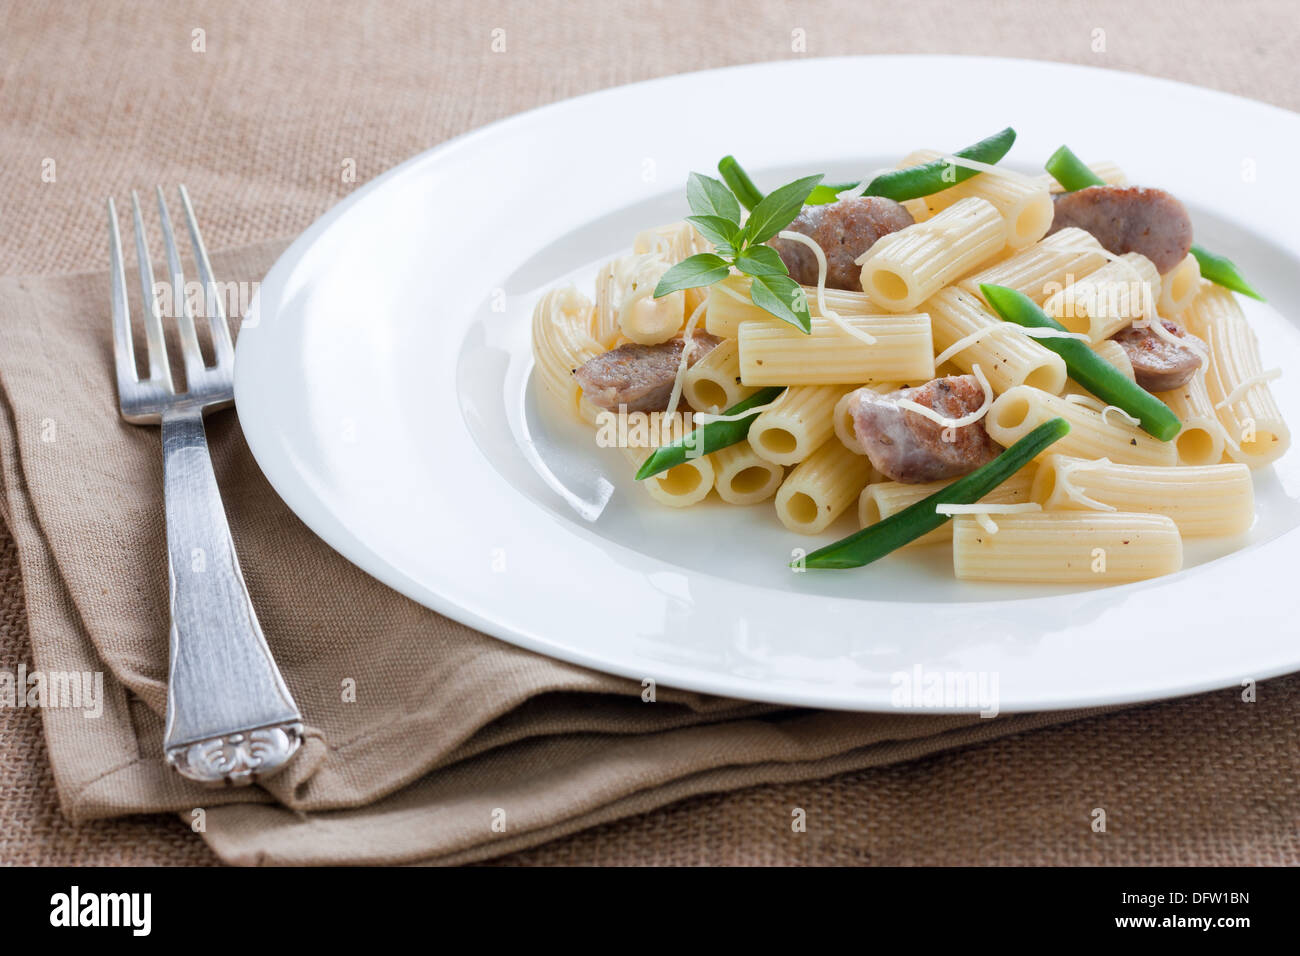 Rigatoni with sausage, green beans and grated cheese Stock Photo